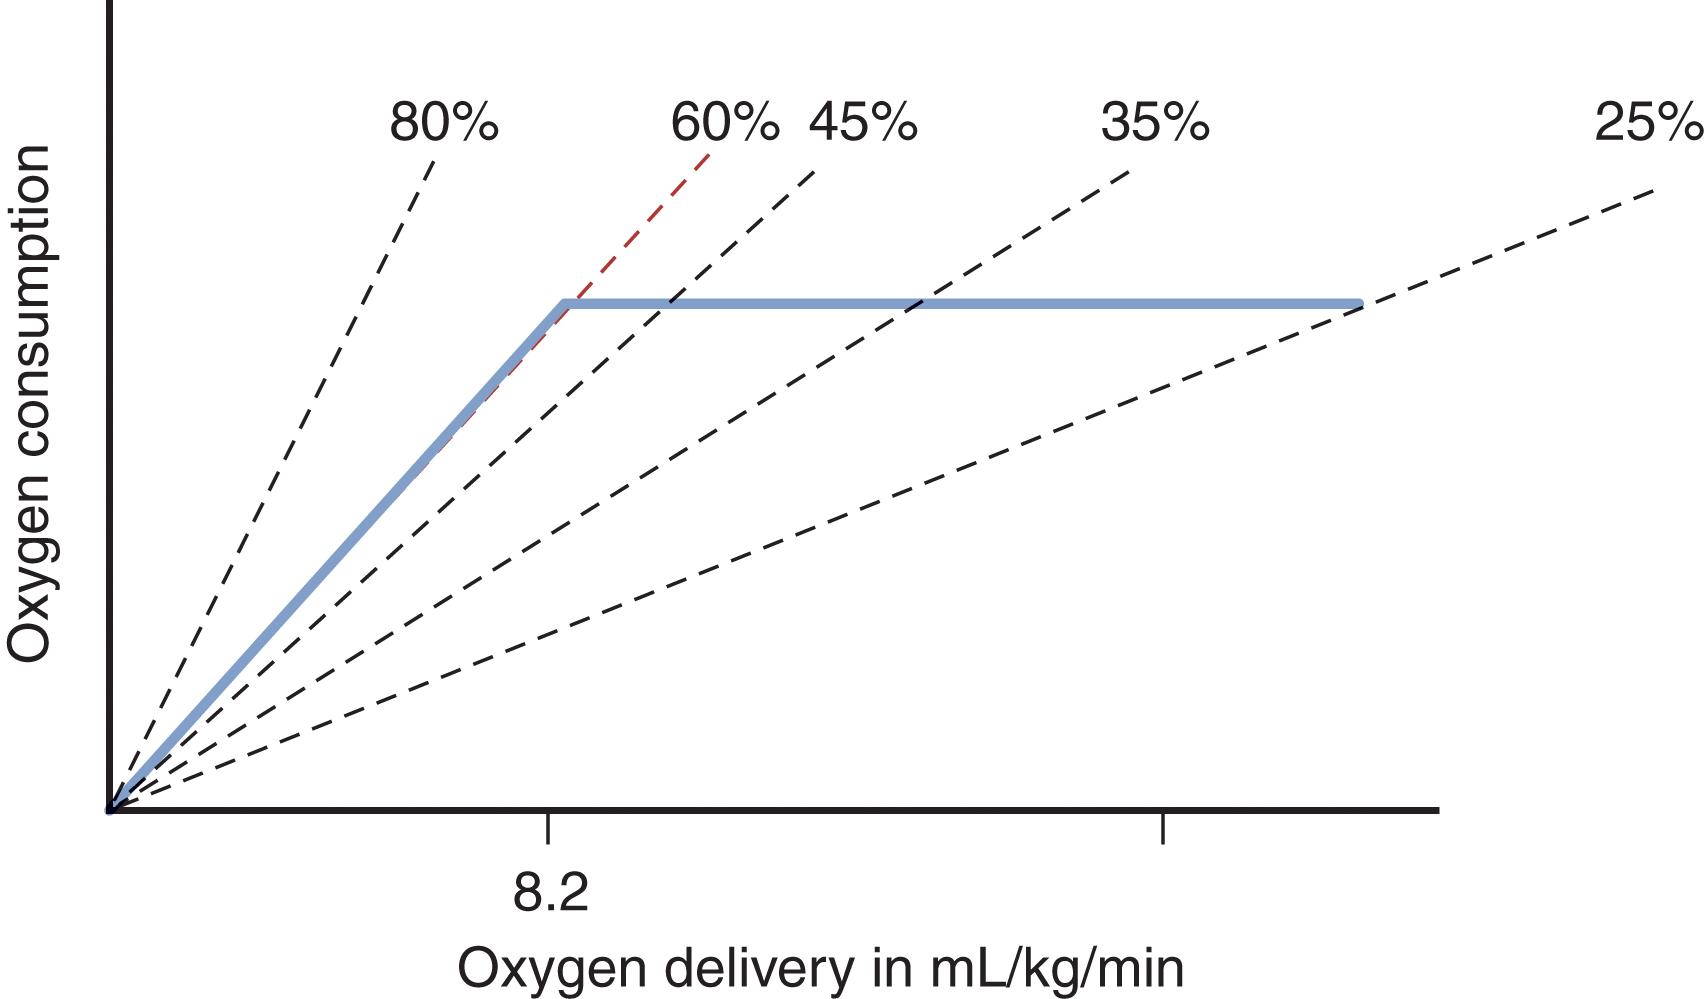 FIGURE 4, In normal conditions, Vo 2 remains supply independent as oxygen delivery decreases due to increased extraction. However, when the O 2 ER approaches 60%, the anaerobic threshold, Do 2 and Vo 2 become linearly dependent therefore, the patient is now in a state of supply dependent Vo 2 .